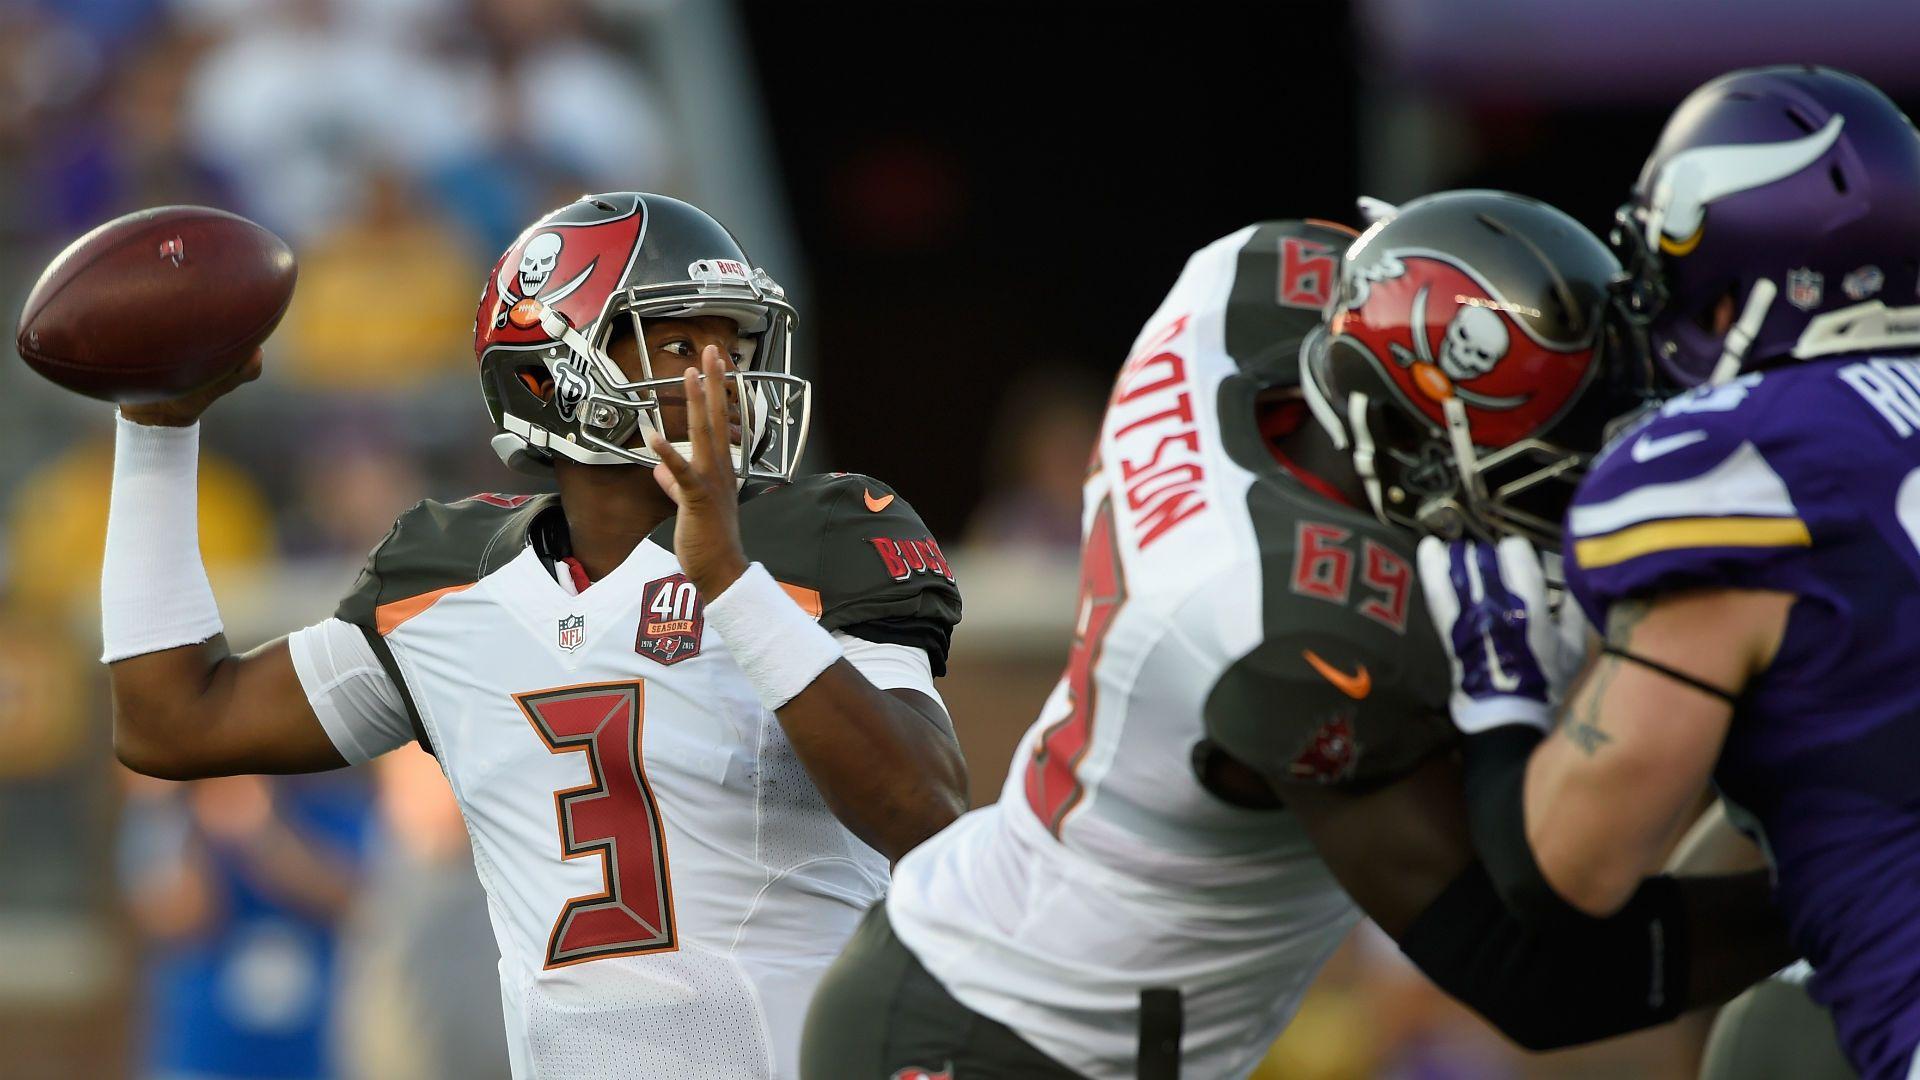 Jameis Winston vs. Buccaneers' quarterback history is bout to